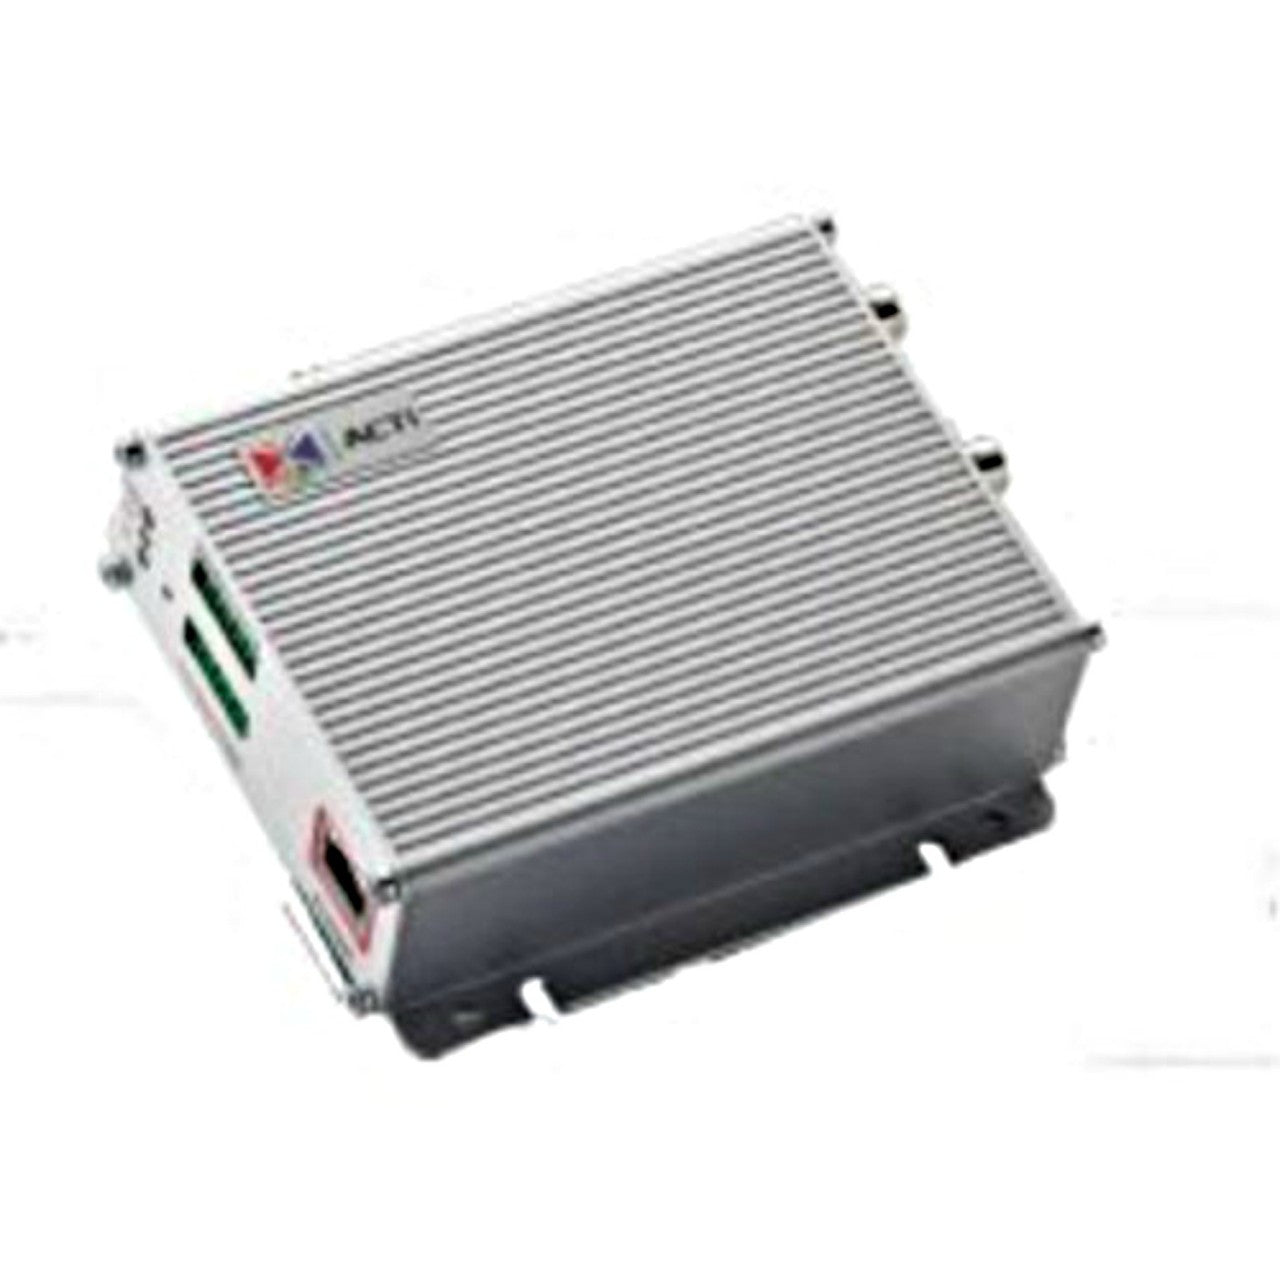 ACTi ACD-2100 1 Channel Video Server